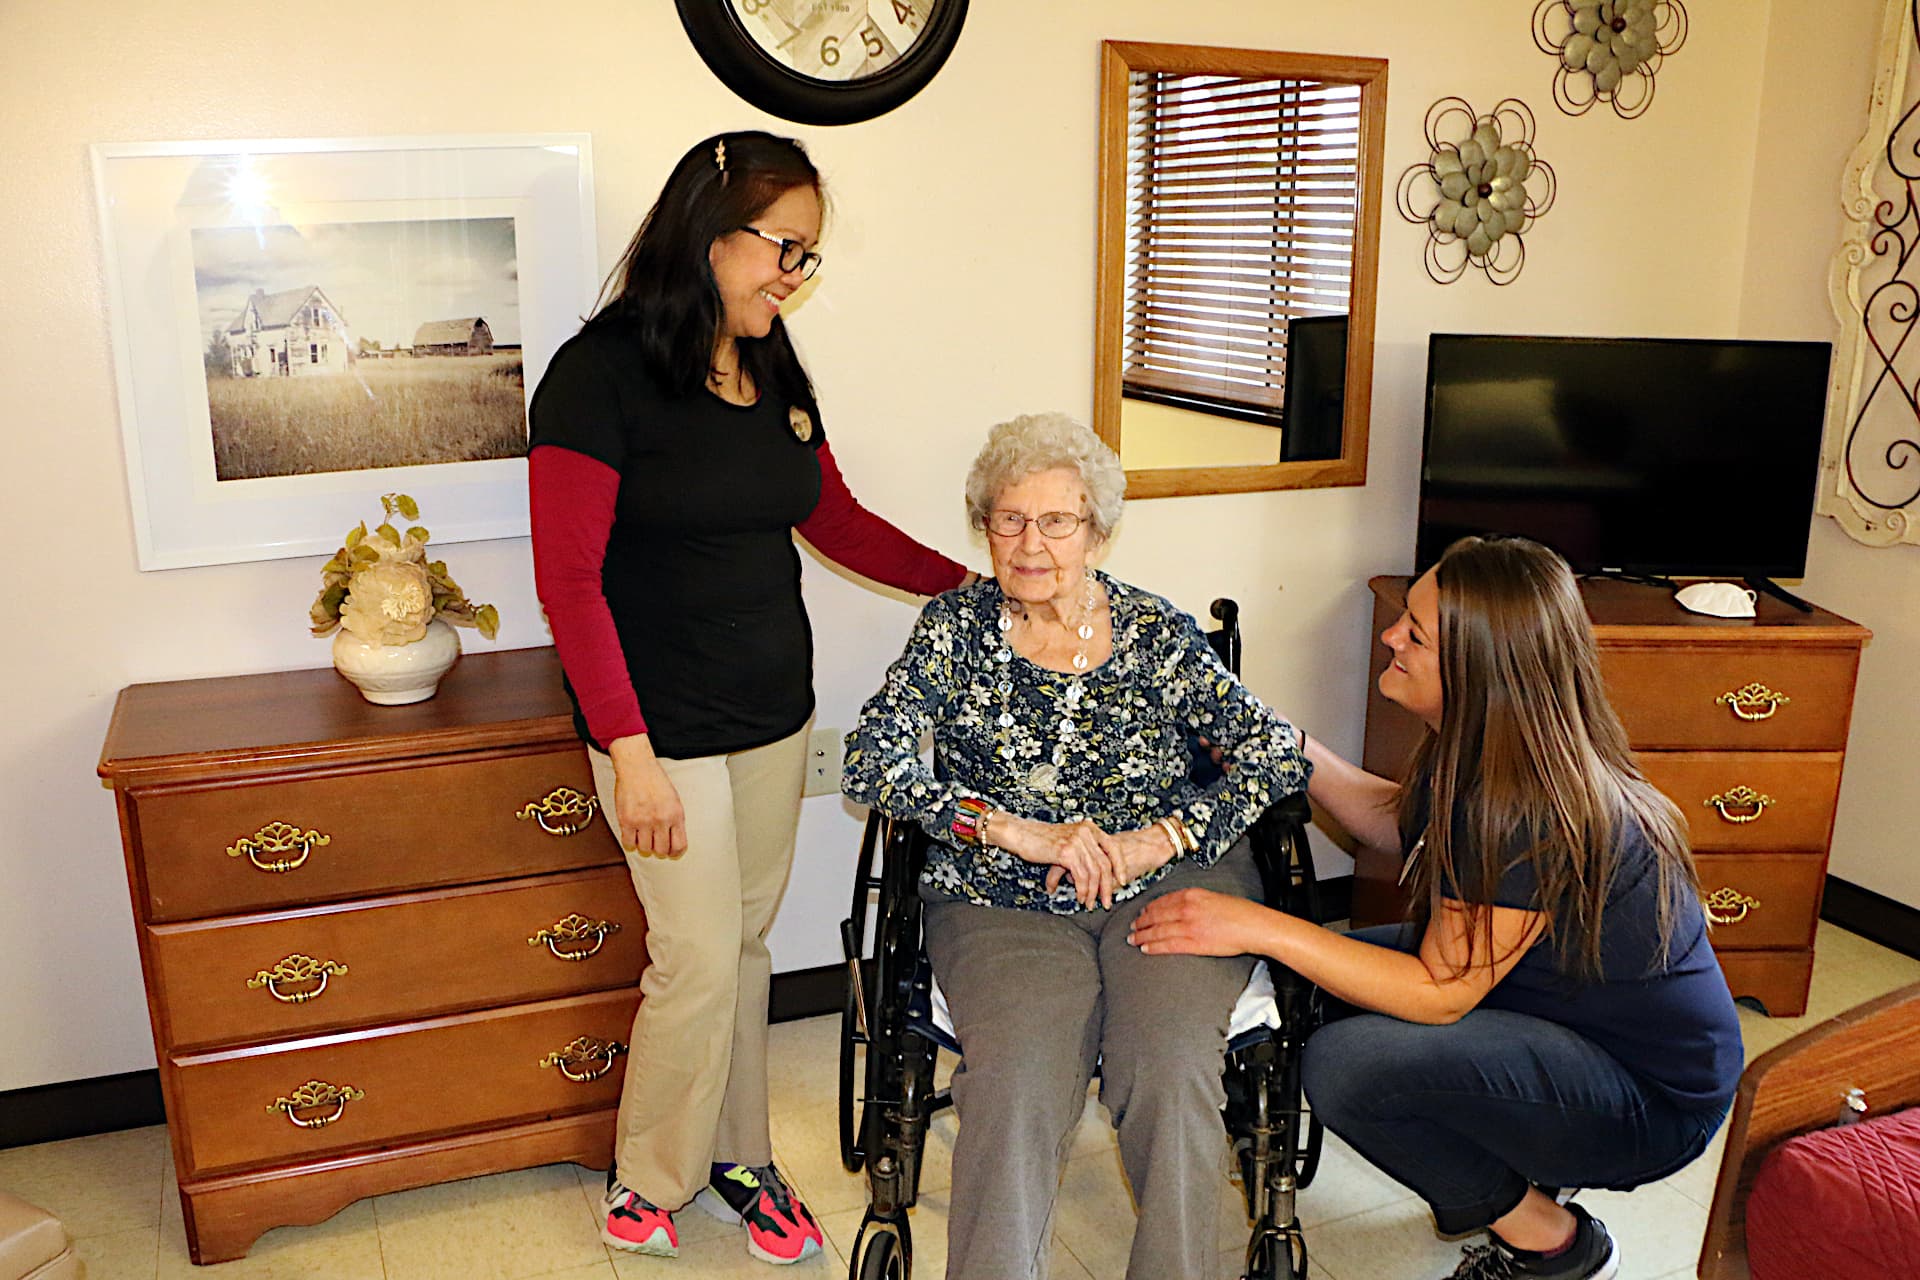 Two nurses speaking with an elderly patient